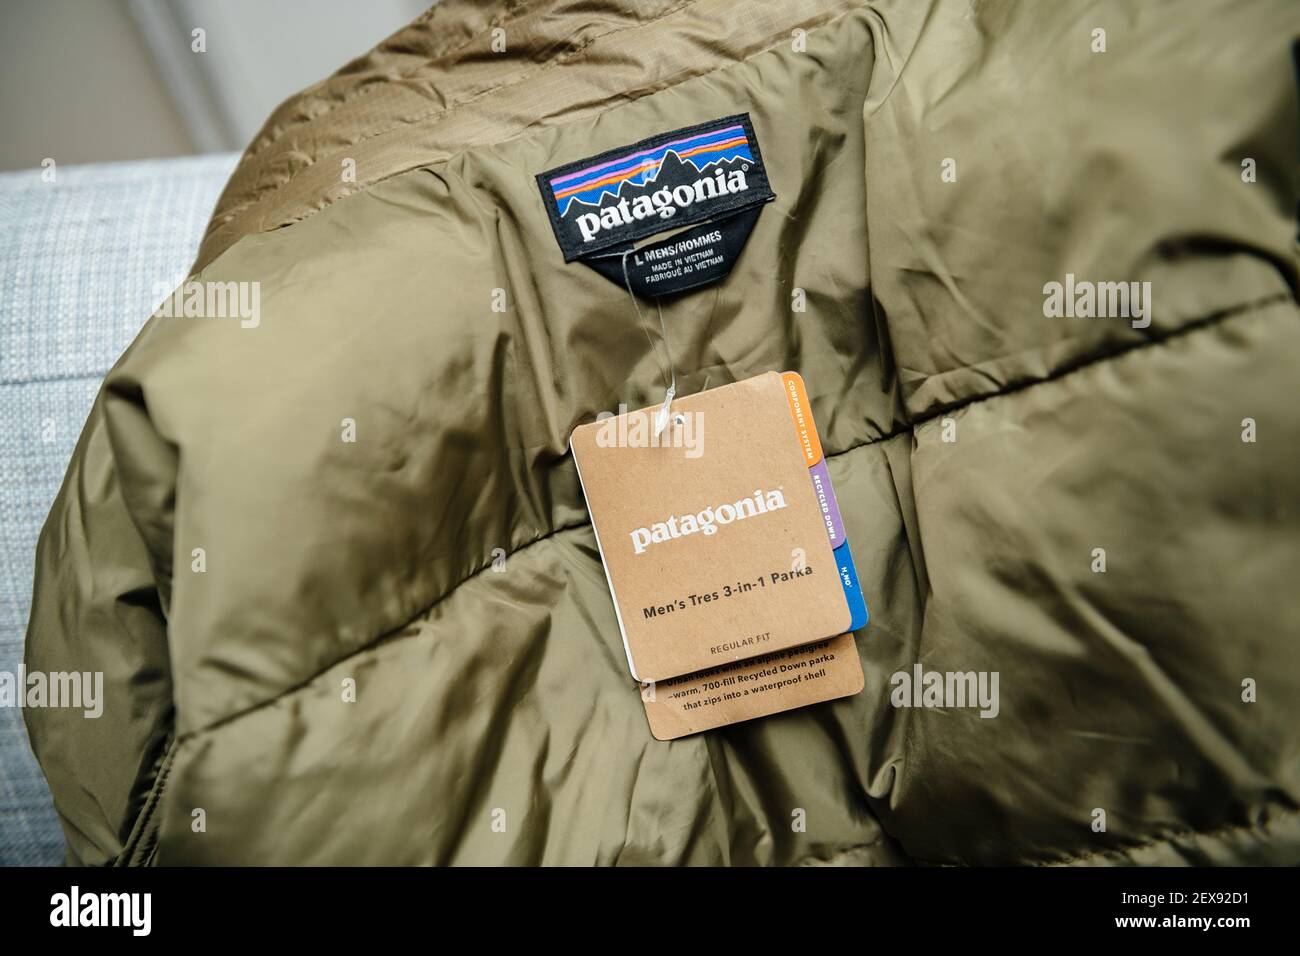 Lyon, France - Feb 16, 2021: macro shot of new parka manufactured by Patagonia model Men's tres 3-in-1 regular fit luxury winter clothes Stock Photo - Alamy